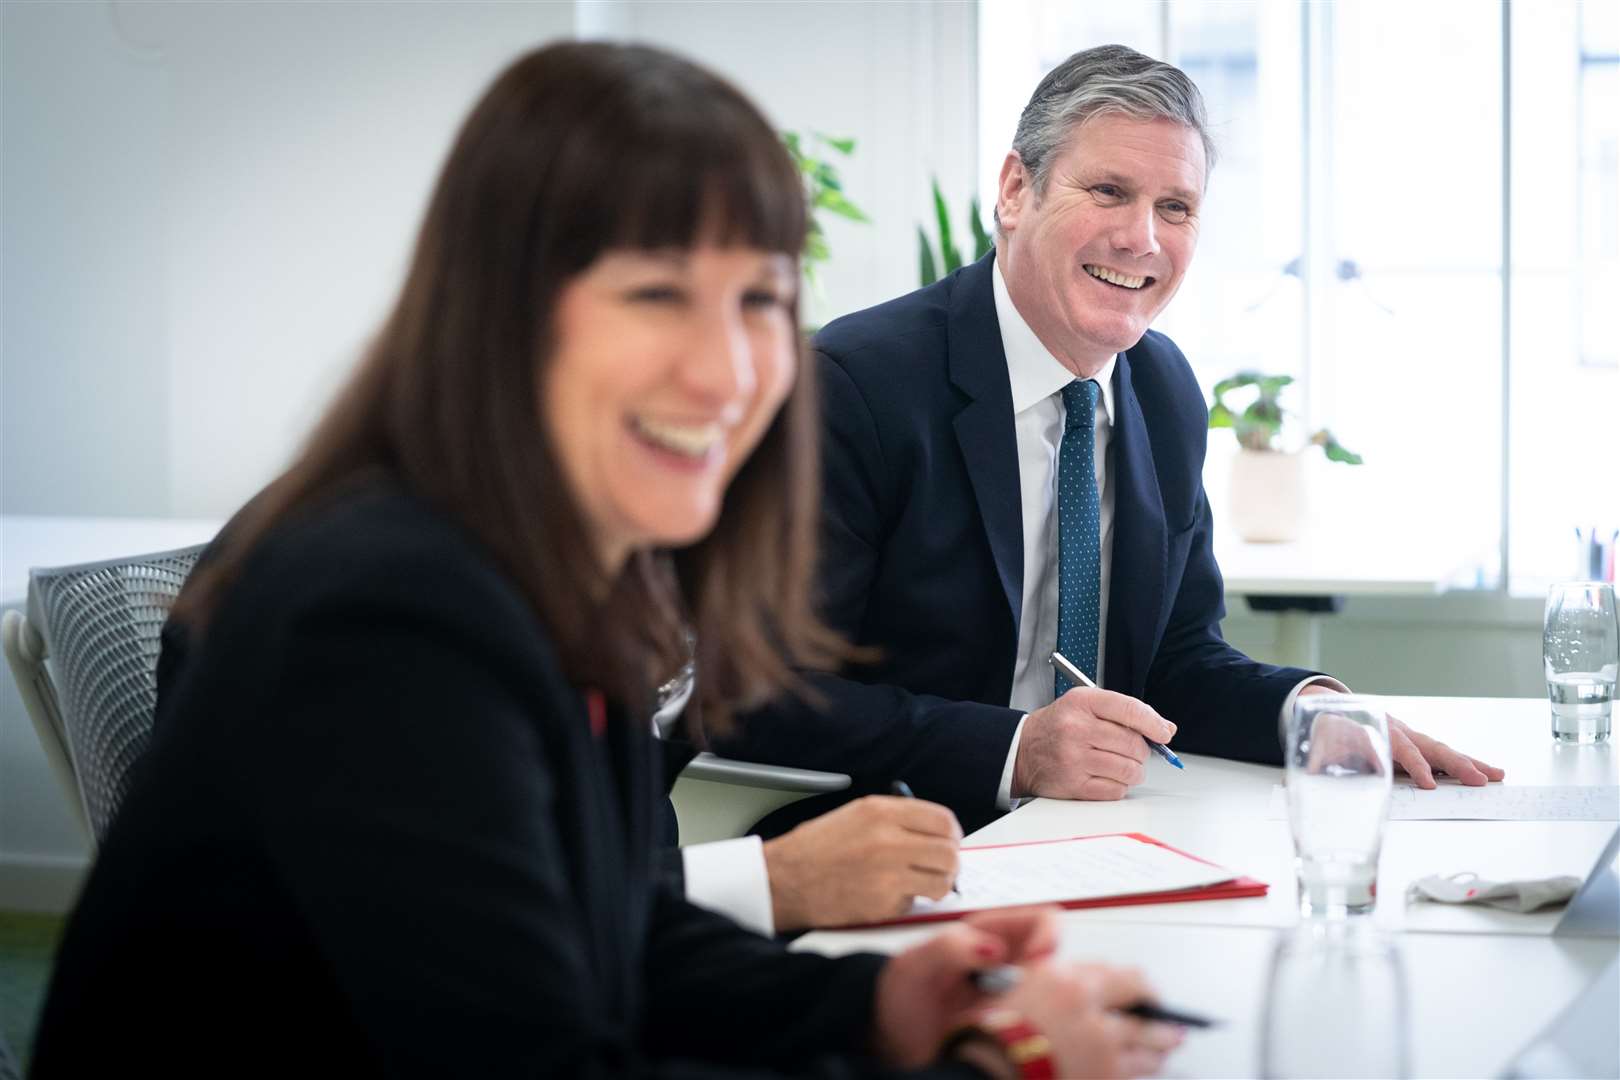 Sir Keir Starmer said he and shadow chancellor Rachel Reeves will provide ‘sound finances’ and ‘strong, secure and fair growth’ (PA)